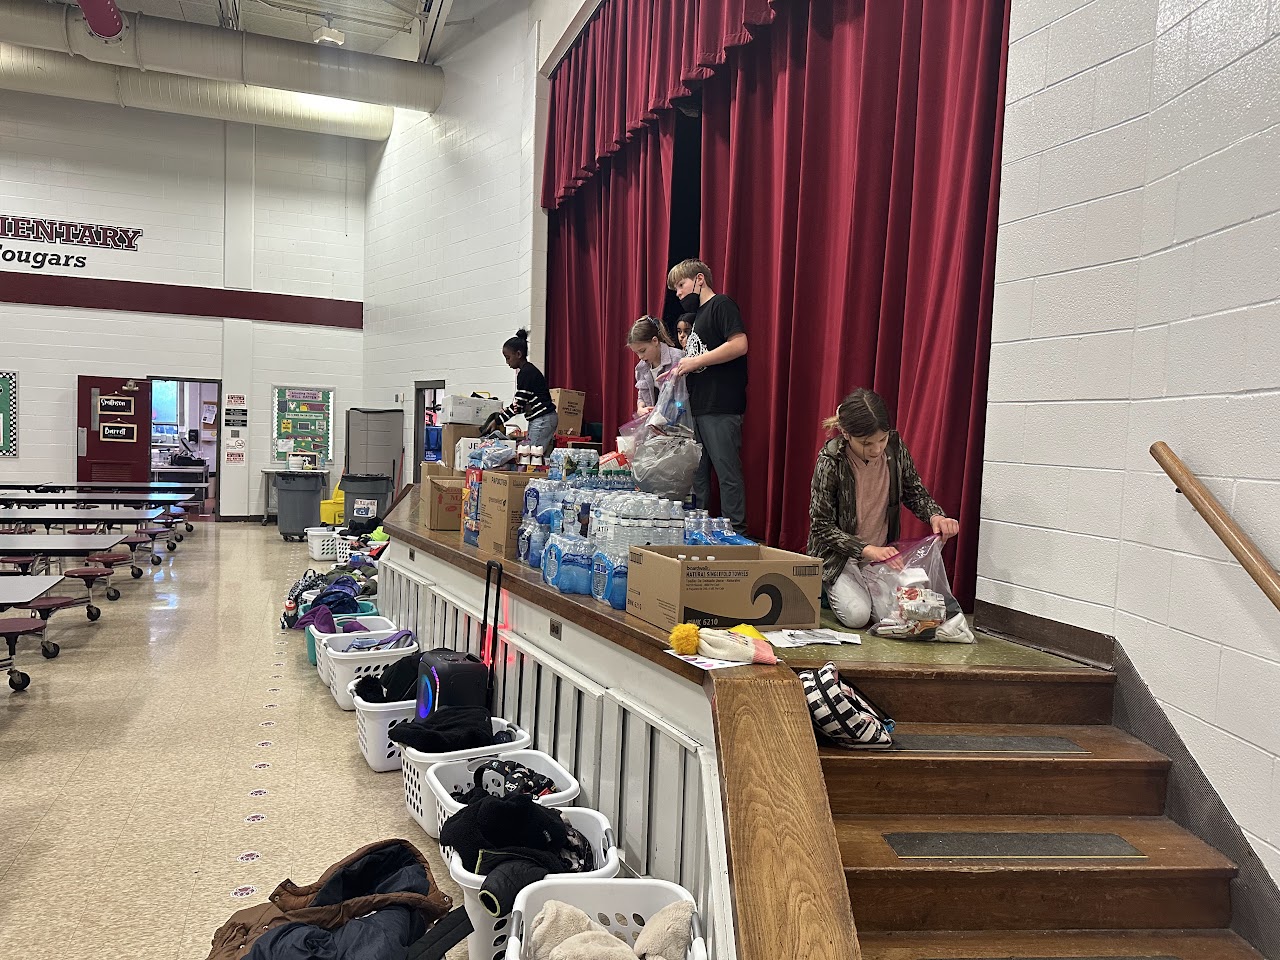 Volunteers helping to load boxes with donations at a school event in the gymnasium.